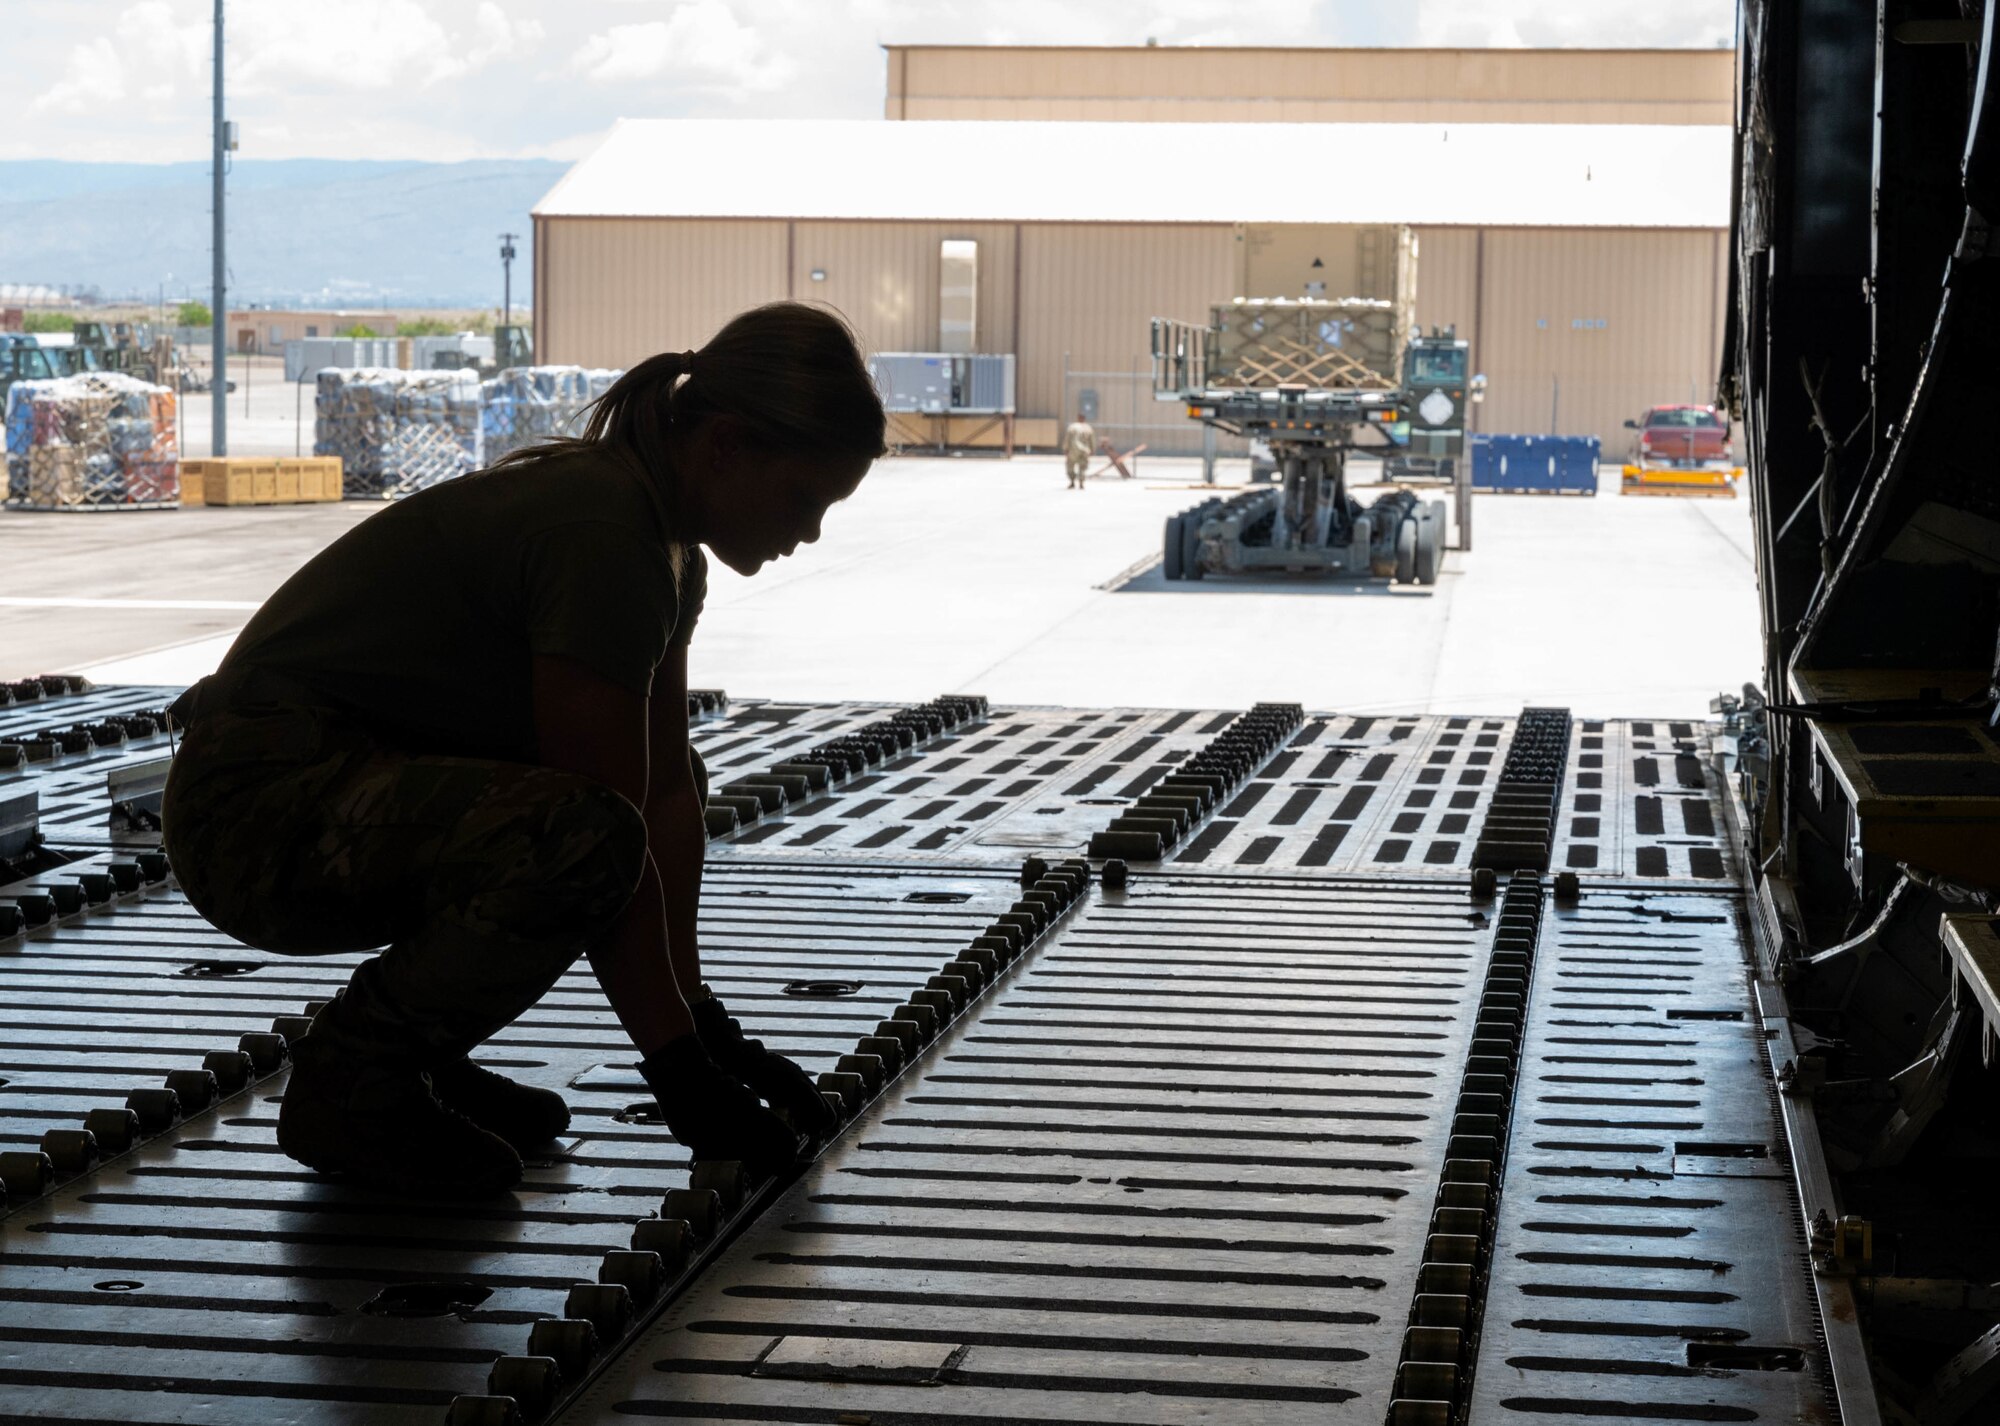 Airman 1st Class Rebecca Reimer, 9th Airlift Squadron loadmaster student, secures rollers to the cargo deck of a Dover Air Force Base C-5M Super Galaxy during a Major Command Service Tail Trainer exercise at Holloman AFB, New Mexico, June 2, 2021. The 9th AS performs MSTTs to expedite upgrade and qualification training for C-5M loadmasters and flight engineers. Over the course of the 10-day MSTT, 9th AS loadmasters loaded and unloaded 320,085 pounds of cargo, including palletized cargo, aircraft ground equipment, a fuel truck and a K-loader. (U.S. Air Force photo by Senior Airman Faith Schaefer)